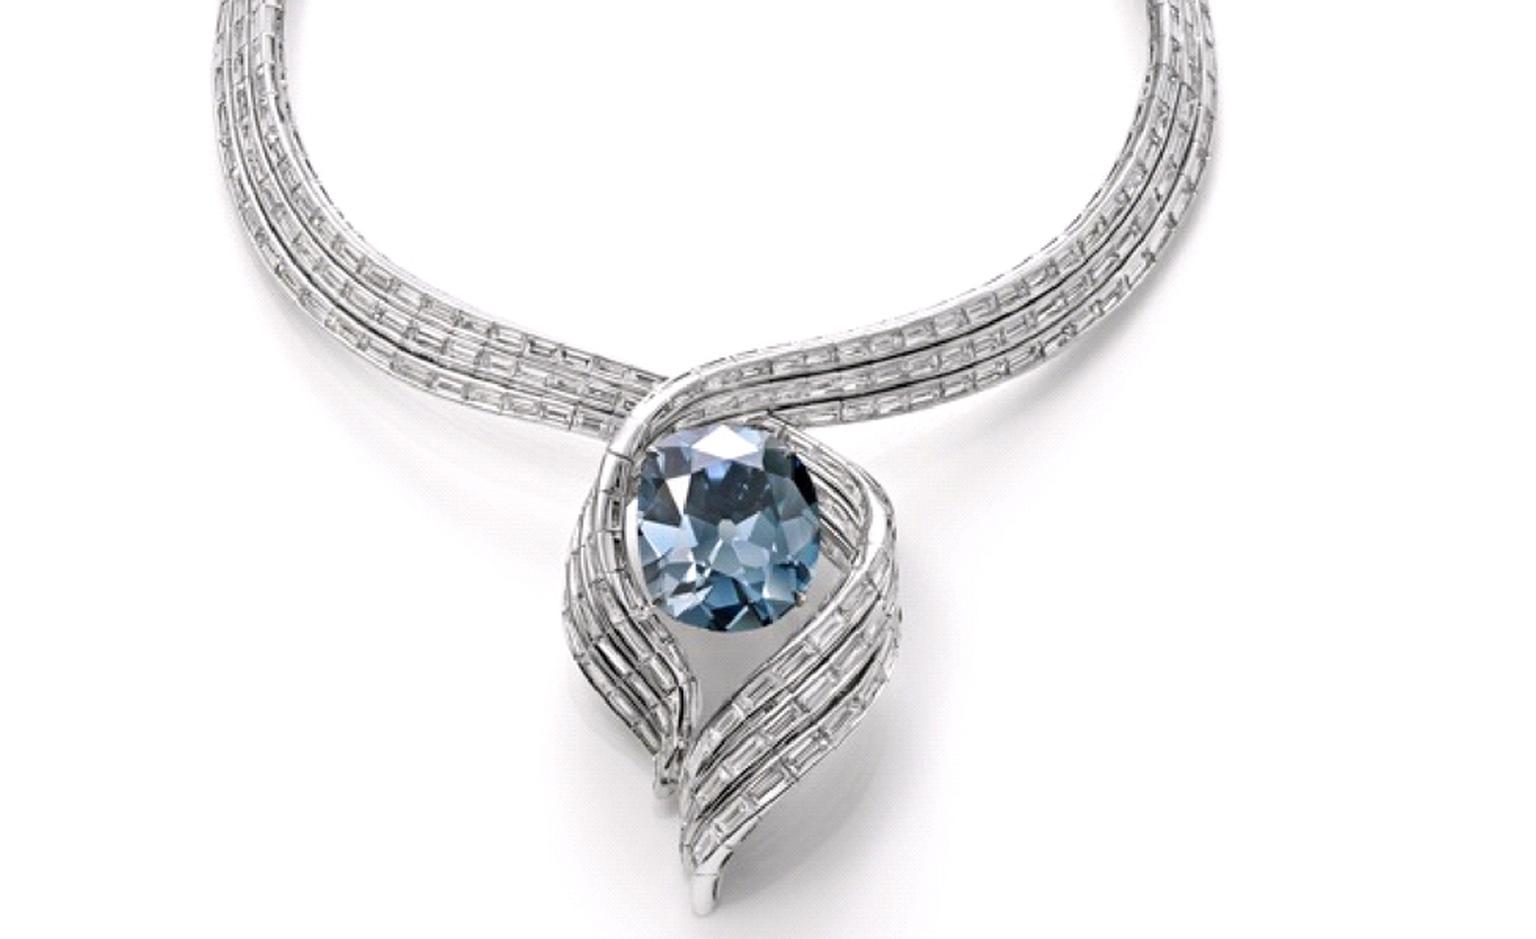 The Hope Diamond in its new setting "Embracing Hope"